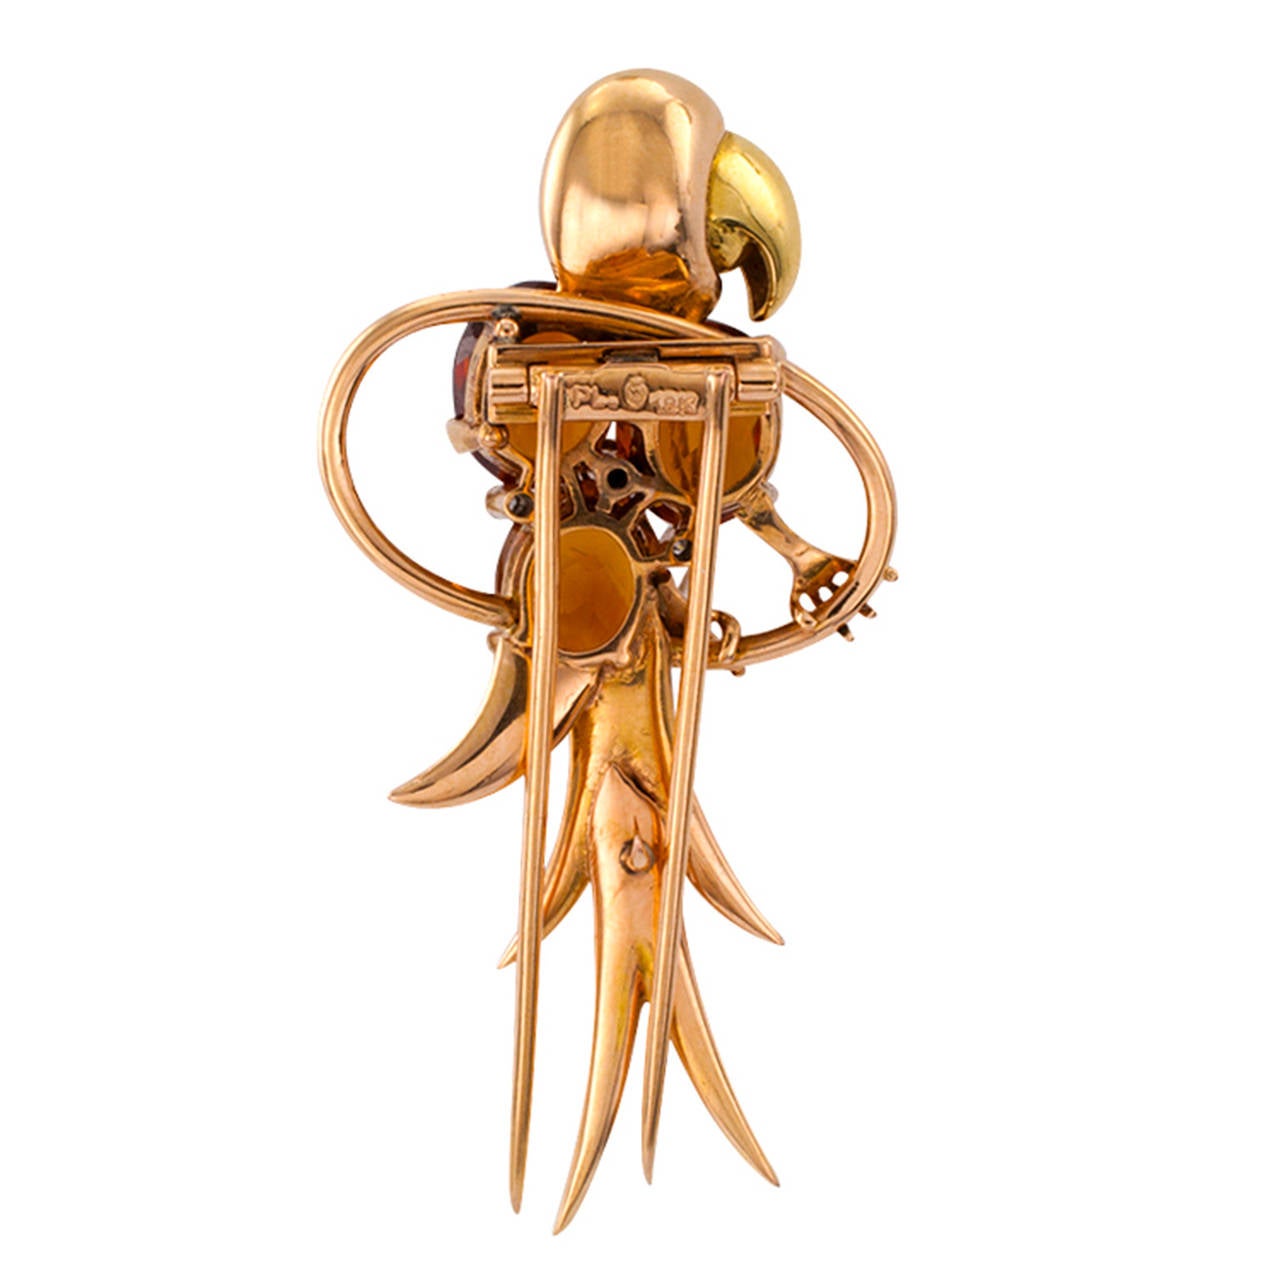 Retro Citrine Gold Parrot Clip/Brooch

Yellow-green and rose 18 karat gold bring a delightful contrast to this whimsical parrot attired in citrine feathers studded with bezel- set rose-cut diamonds, similarly cut diamonds form the eye.  All the